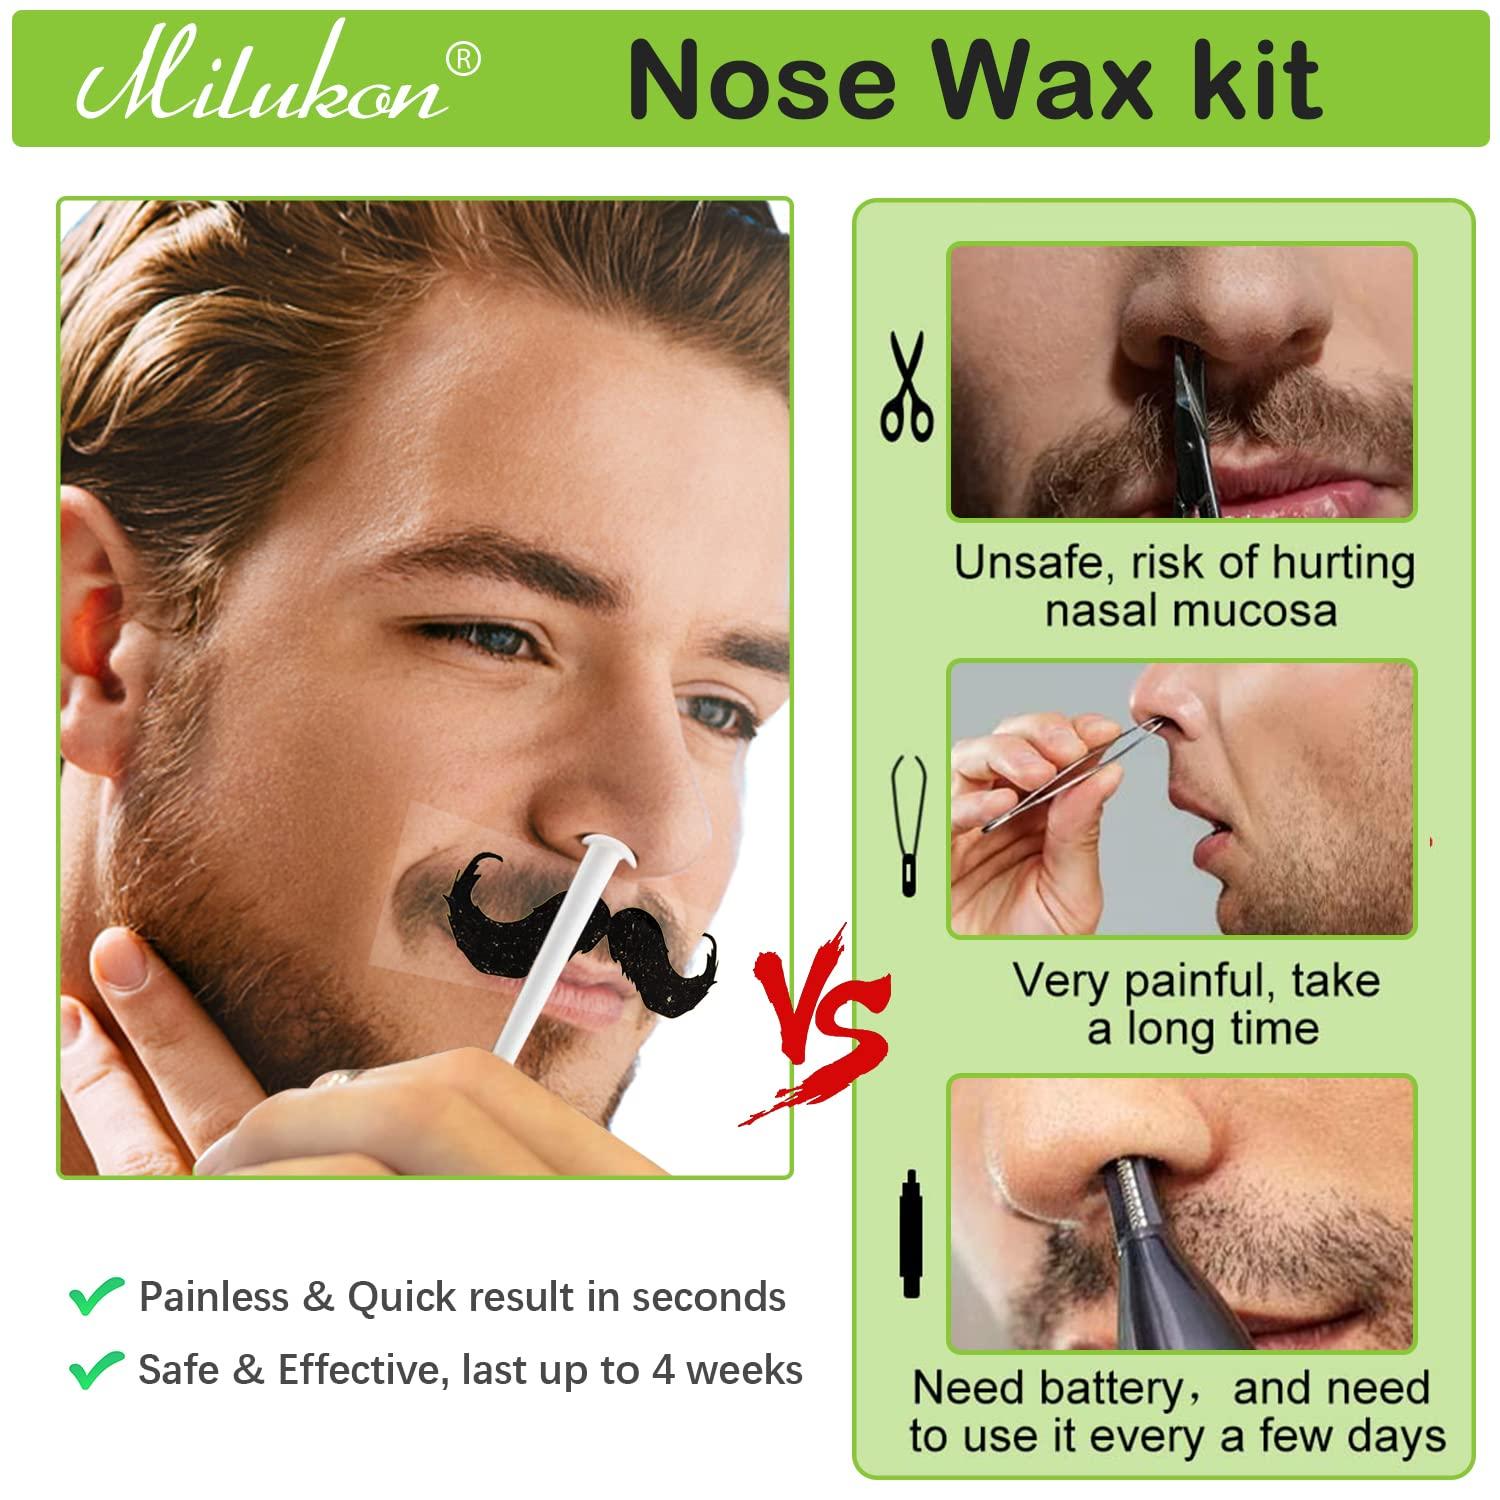 Nose Wax Kit for Men Women, Nose Hair Removal Ear Hair Waxing Kit Eyebrows  Lips Facial Nose Hair Remover Wax, 50g Hard Wax Beads 20 Applicators 10  Paper Cups Full Set Nose